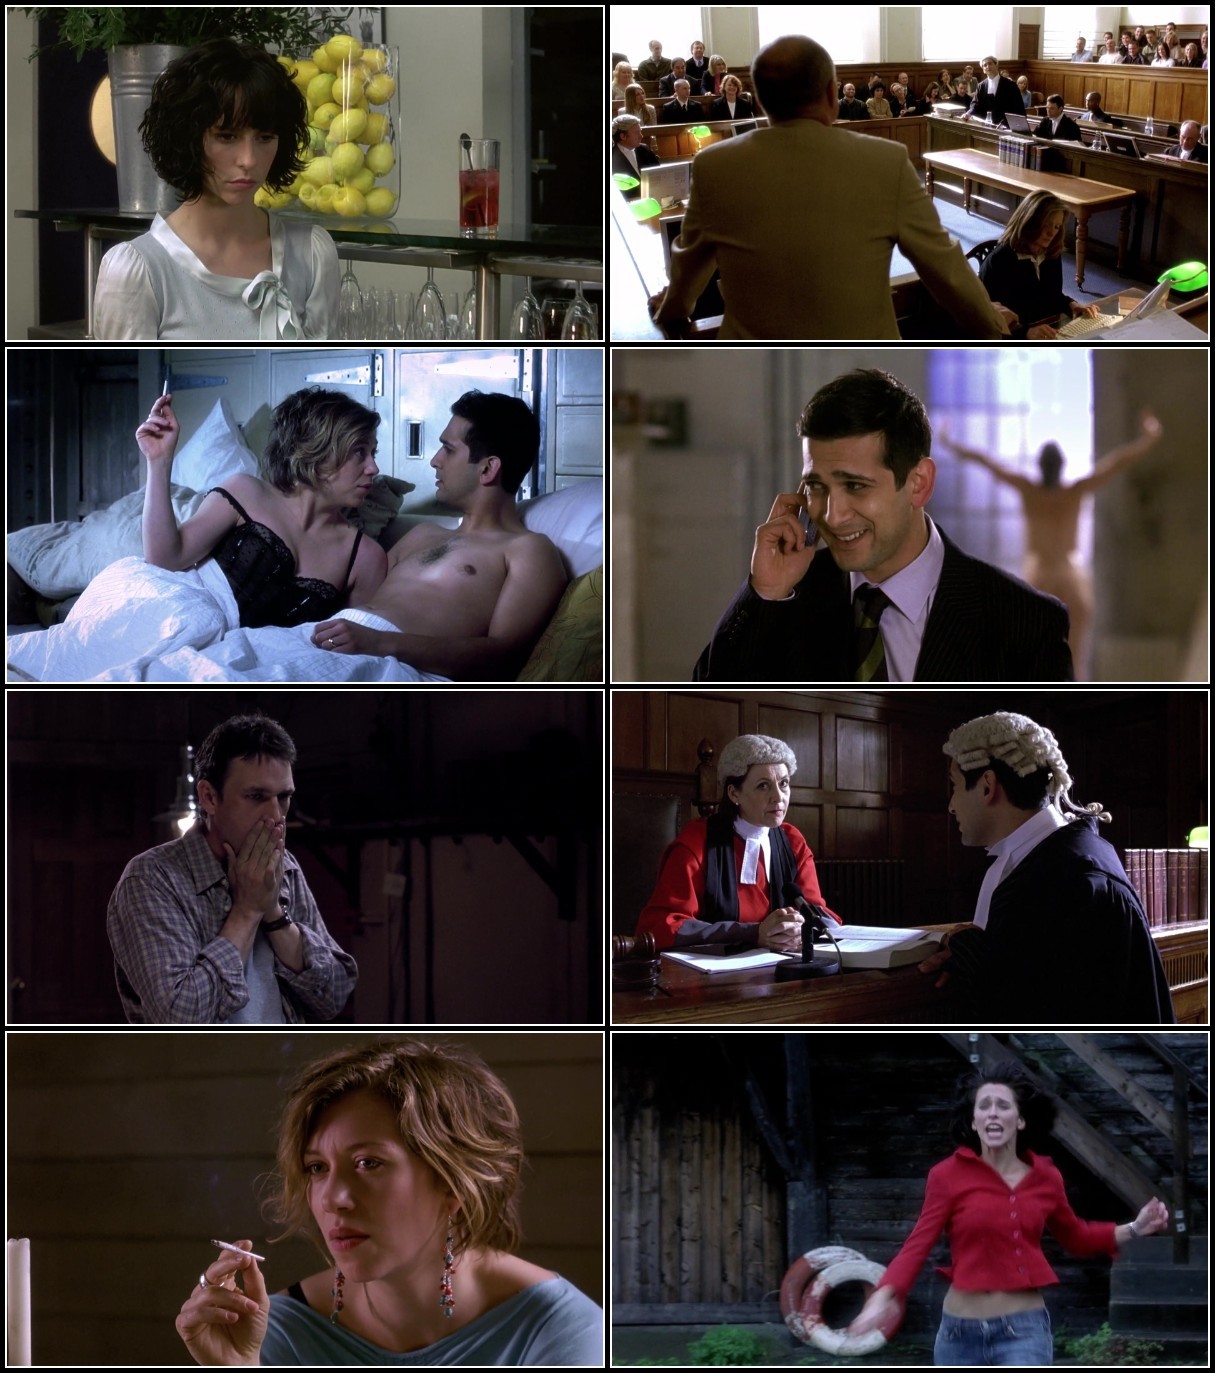 The Truth About Love (2005) 1080p WEBRip x264 AAC-YTS